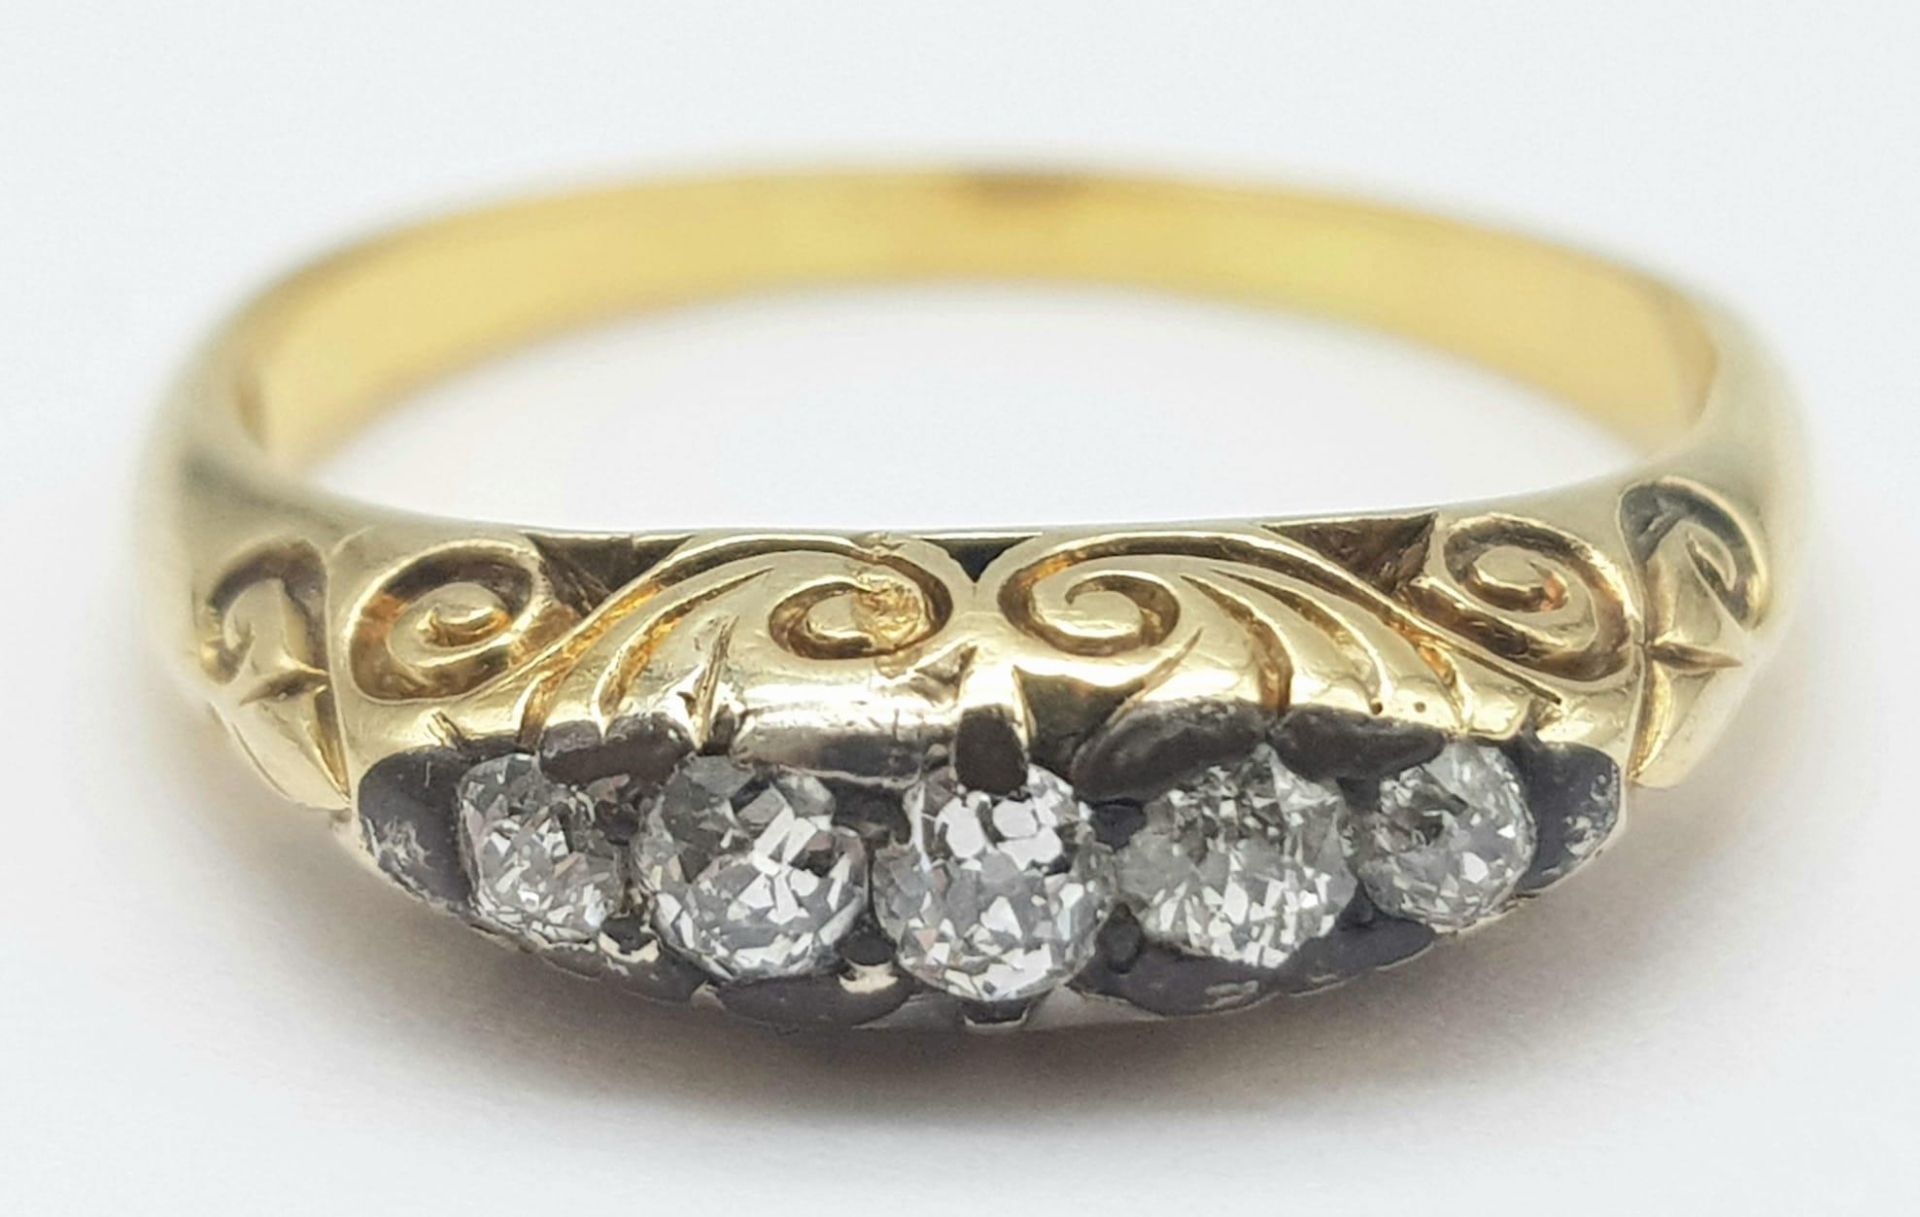 An 18K Yellow Gold Diamond Gypsy Ring. 0.15ctw diamonds. Size P. 4.9g total weight. - Image 3 of 5